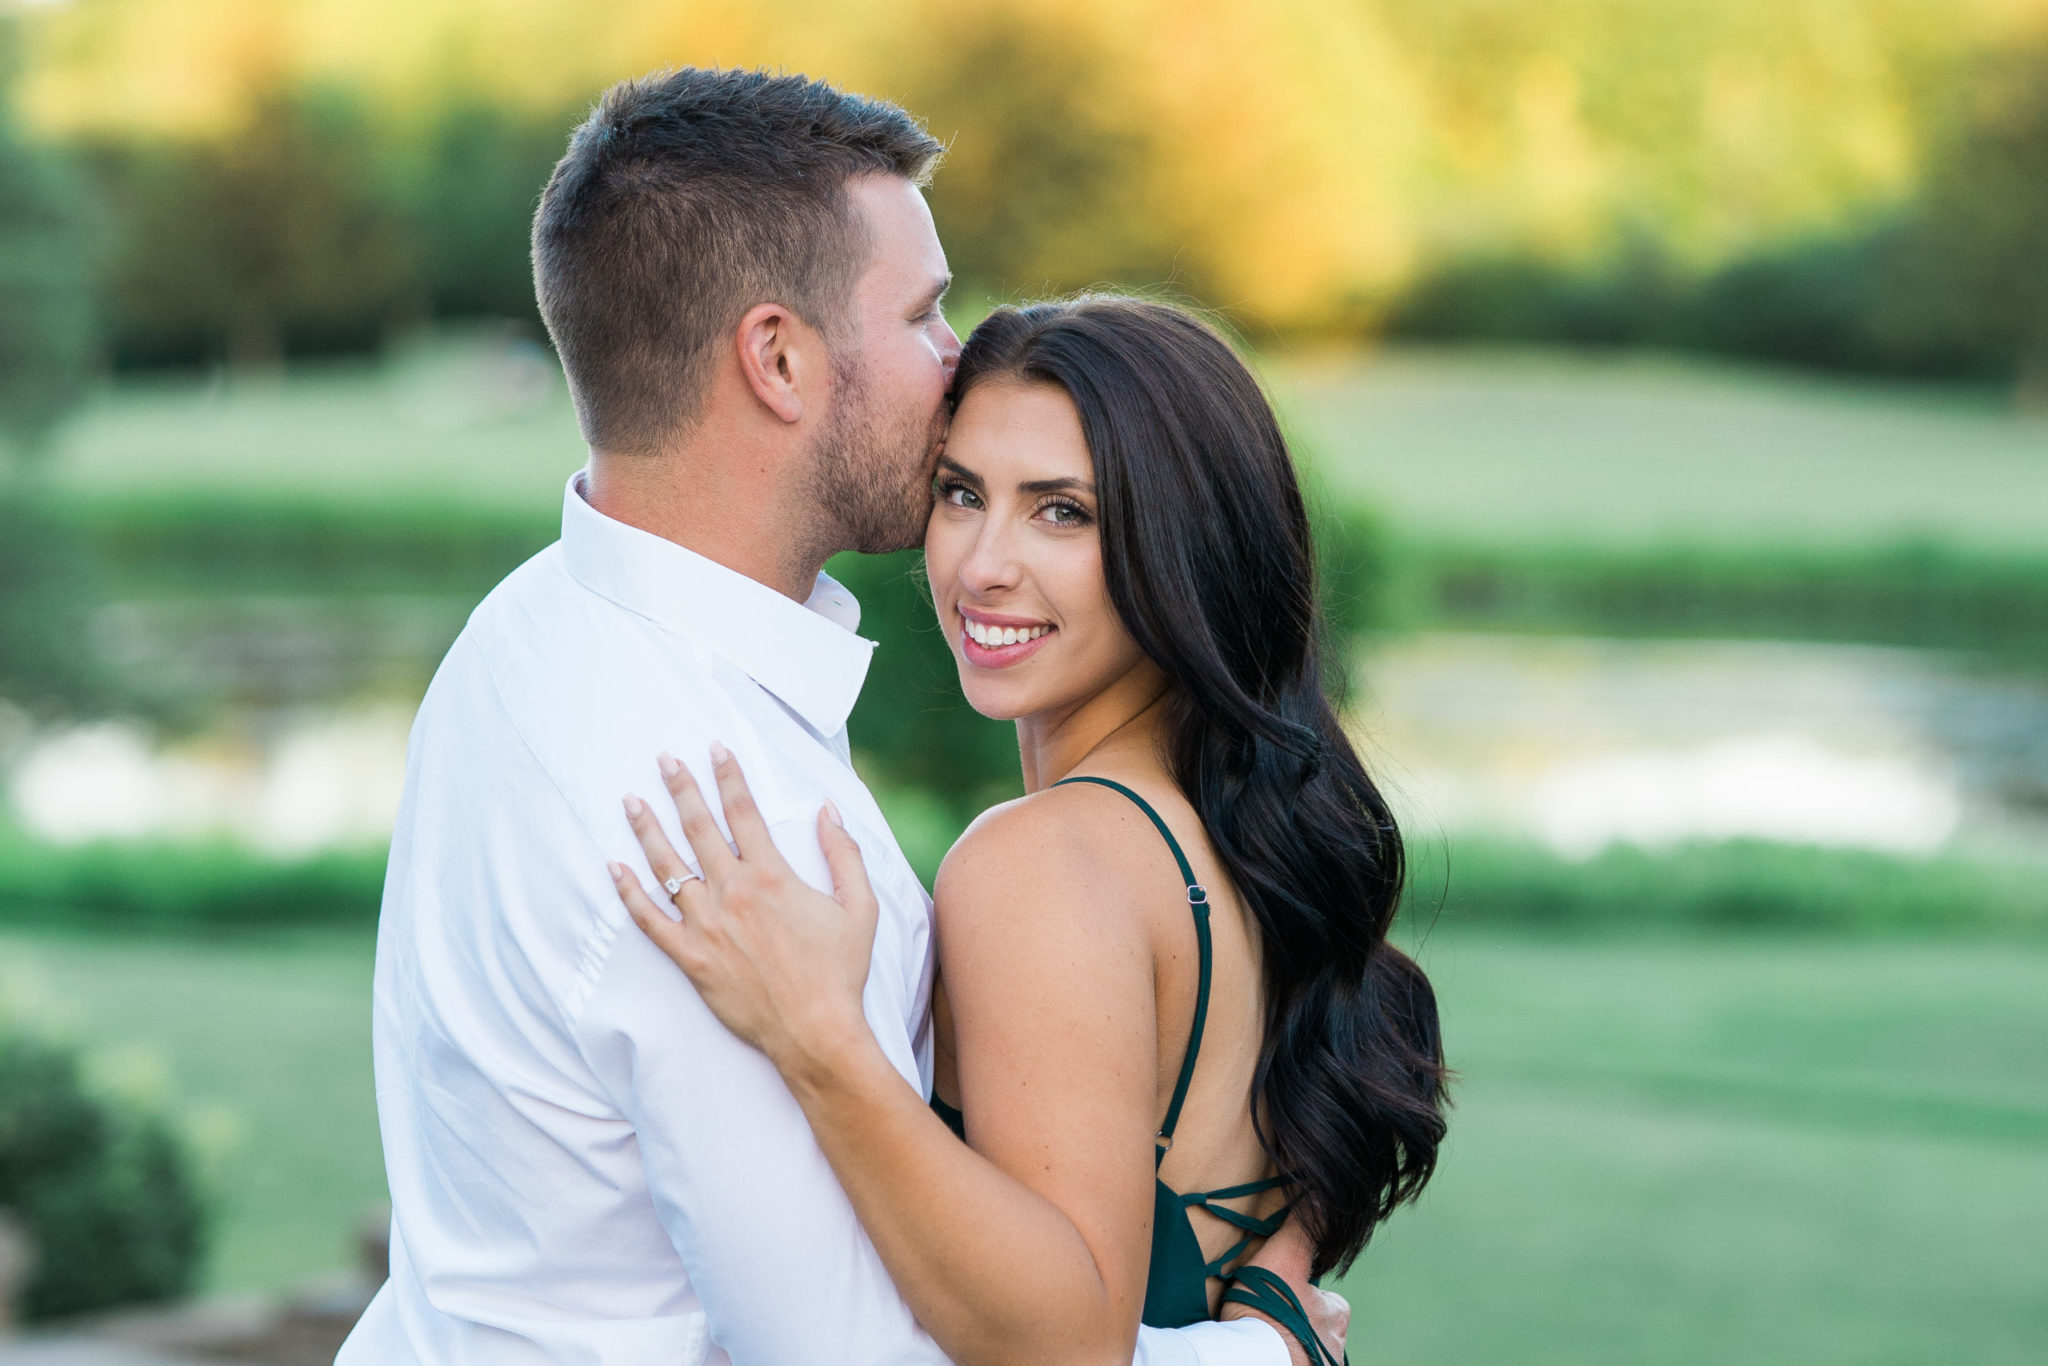 a couple embracing and smiling during their golden hour engagement photo session